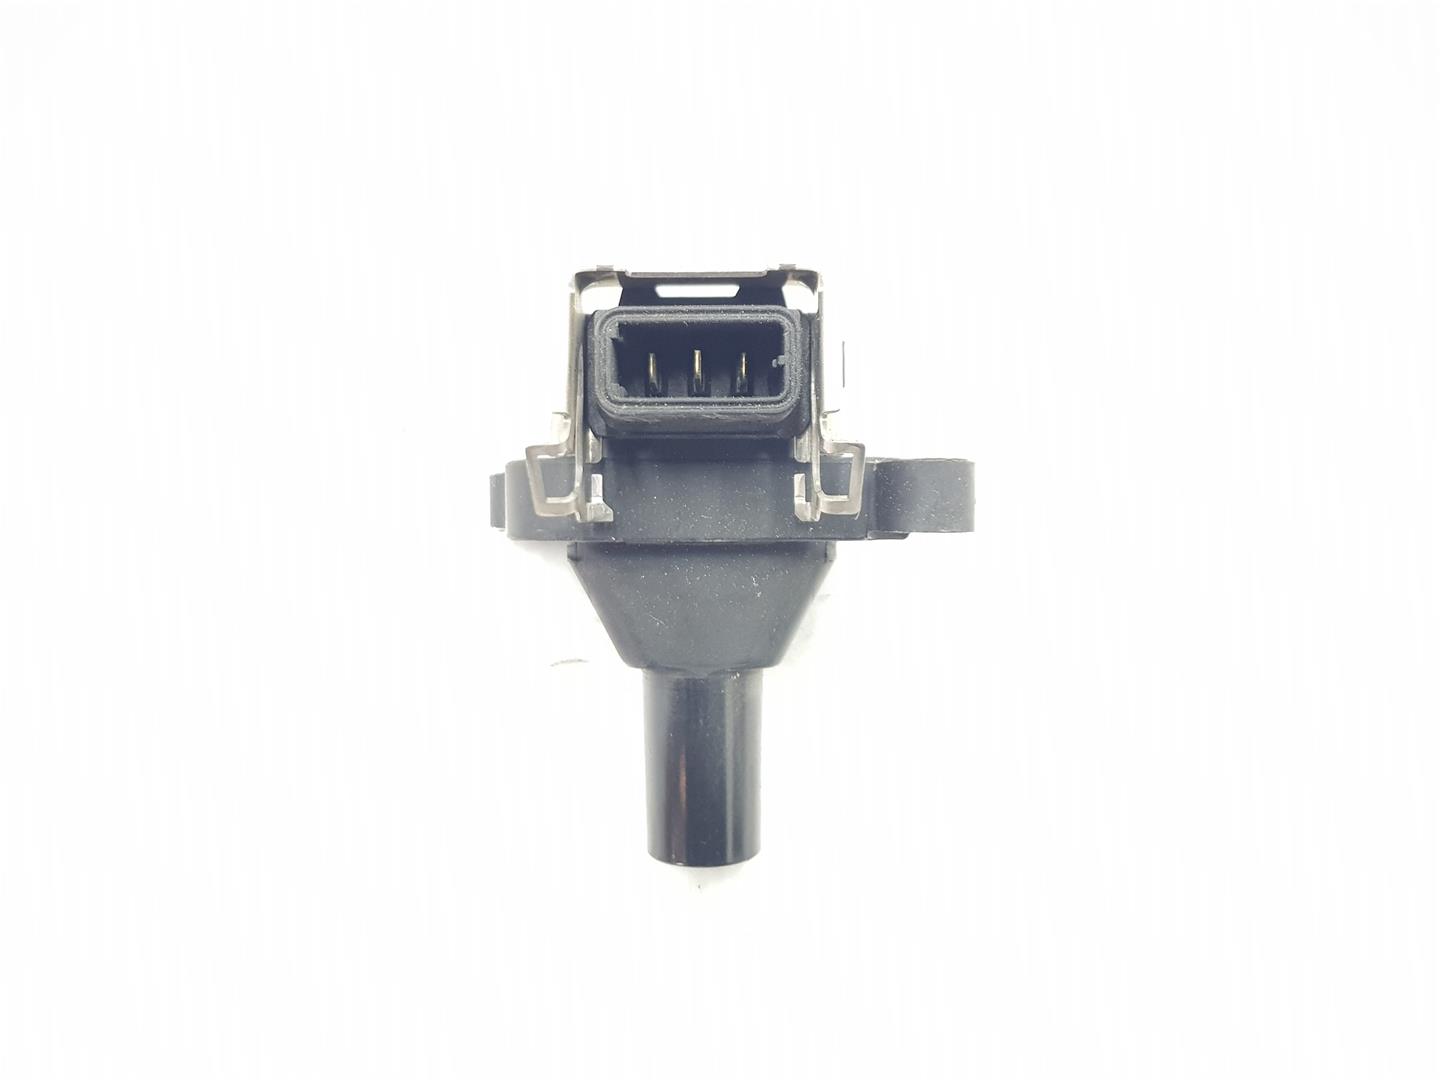 BMW 5 Series E39 (1995-2004) High Voltage Ignition Coil 12131740477, 1703227, 0221504004 19812248